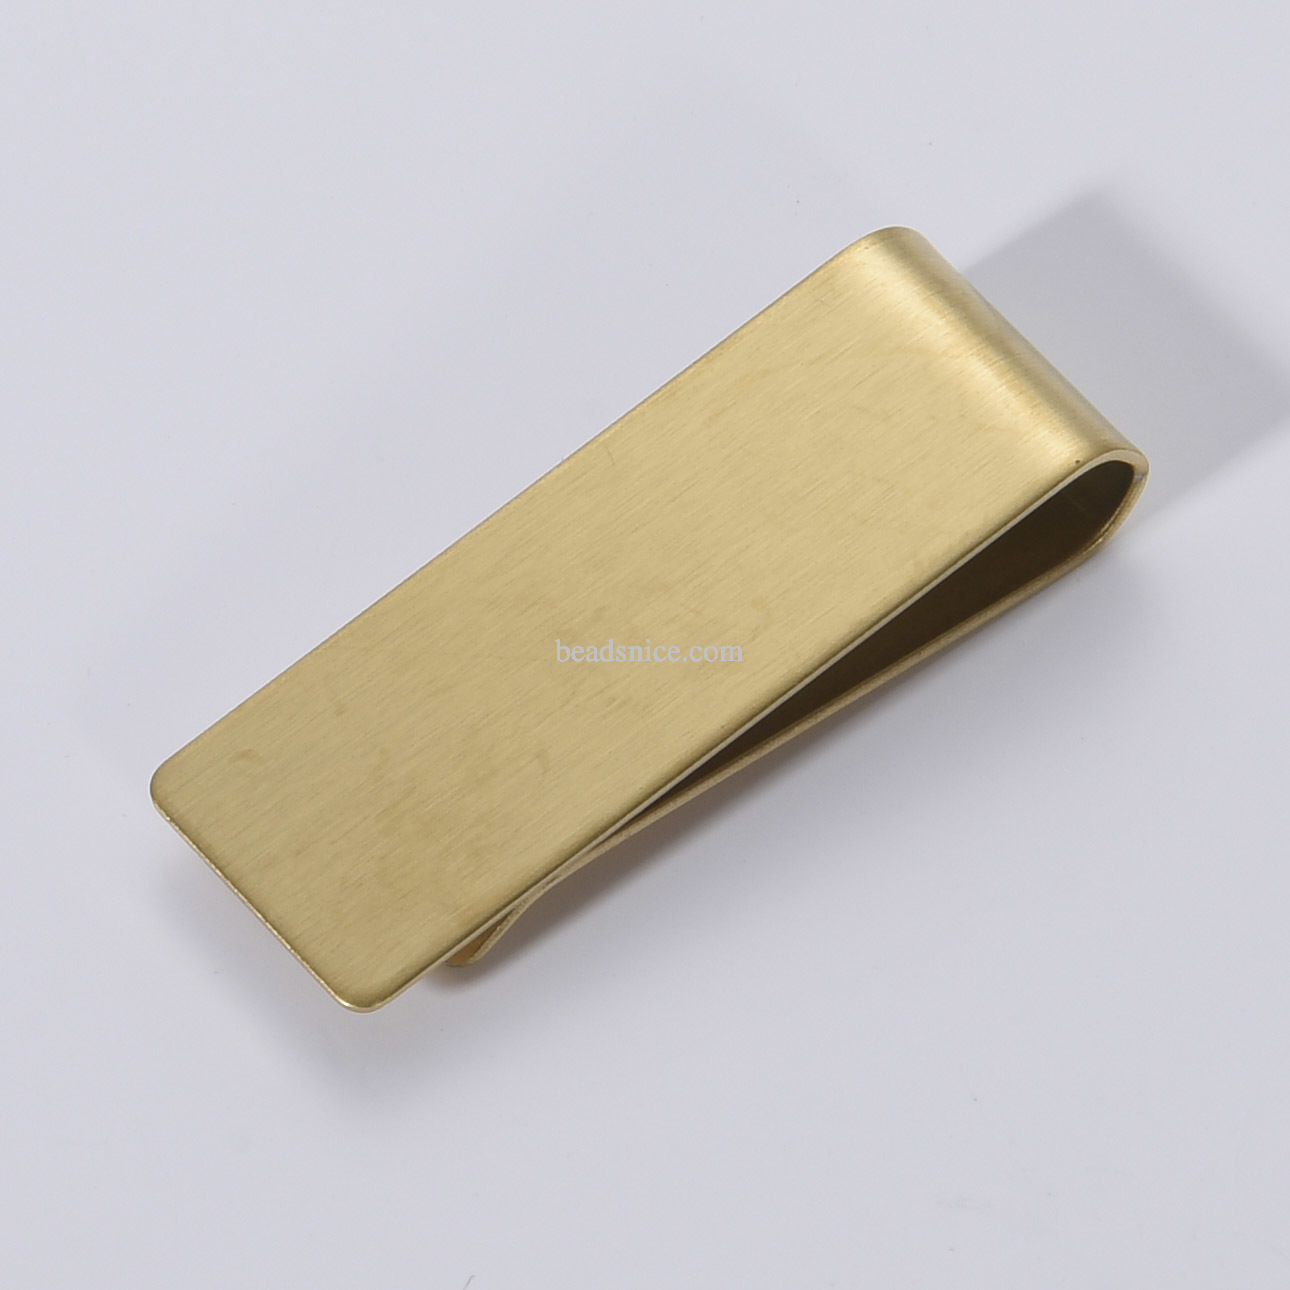 Stainless Steel Money Clip Silver Metal Money Clips Slim Cash Wallet Credit Card Money Cards Holder for Men and Women Durable Po